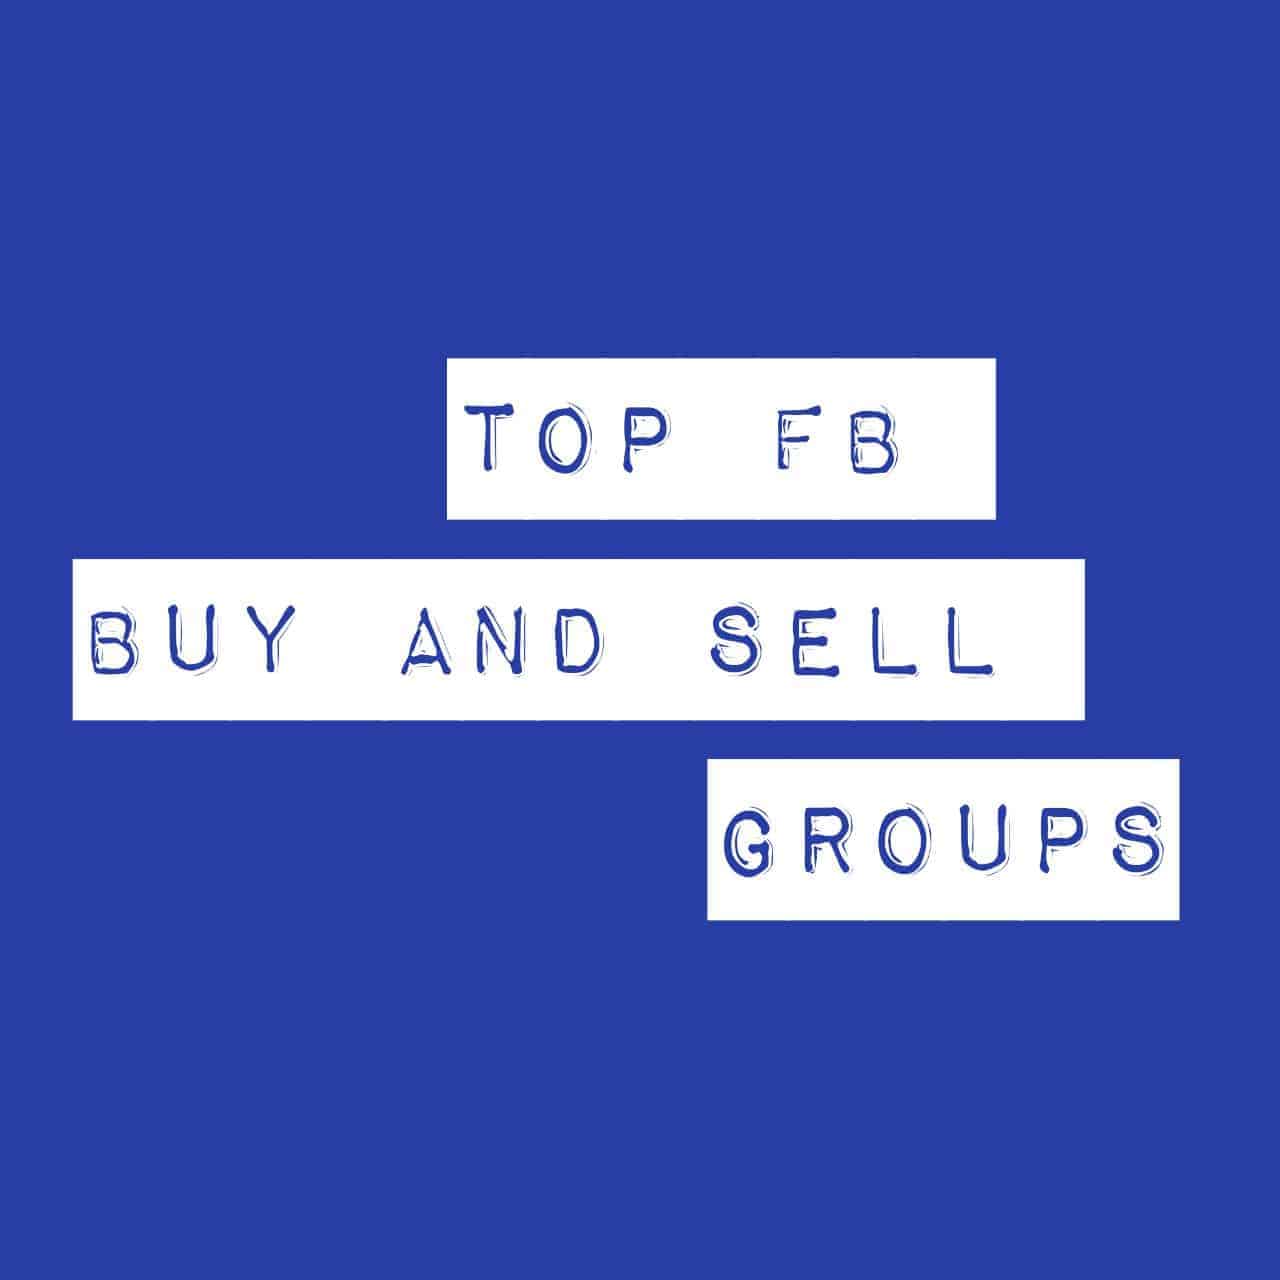 Top Facebook Buy and Sell Groups for online shopping on FB!